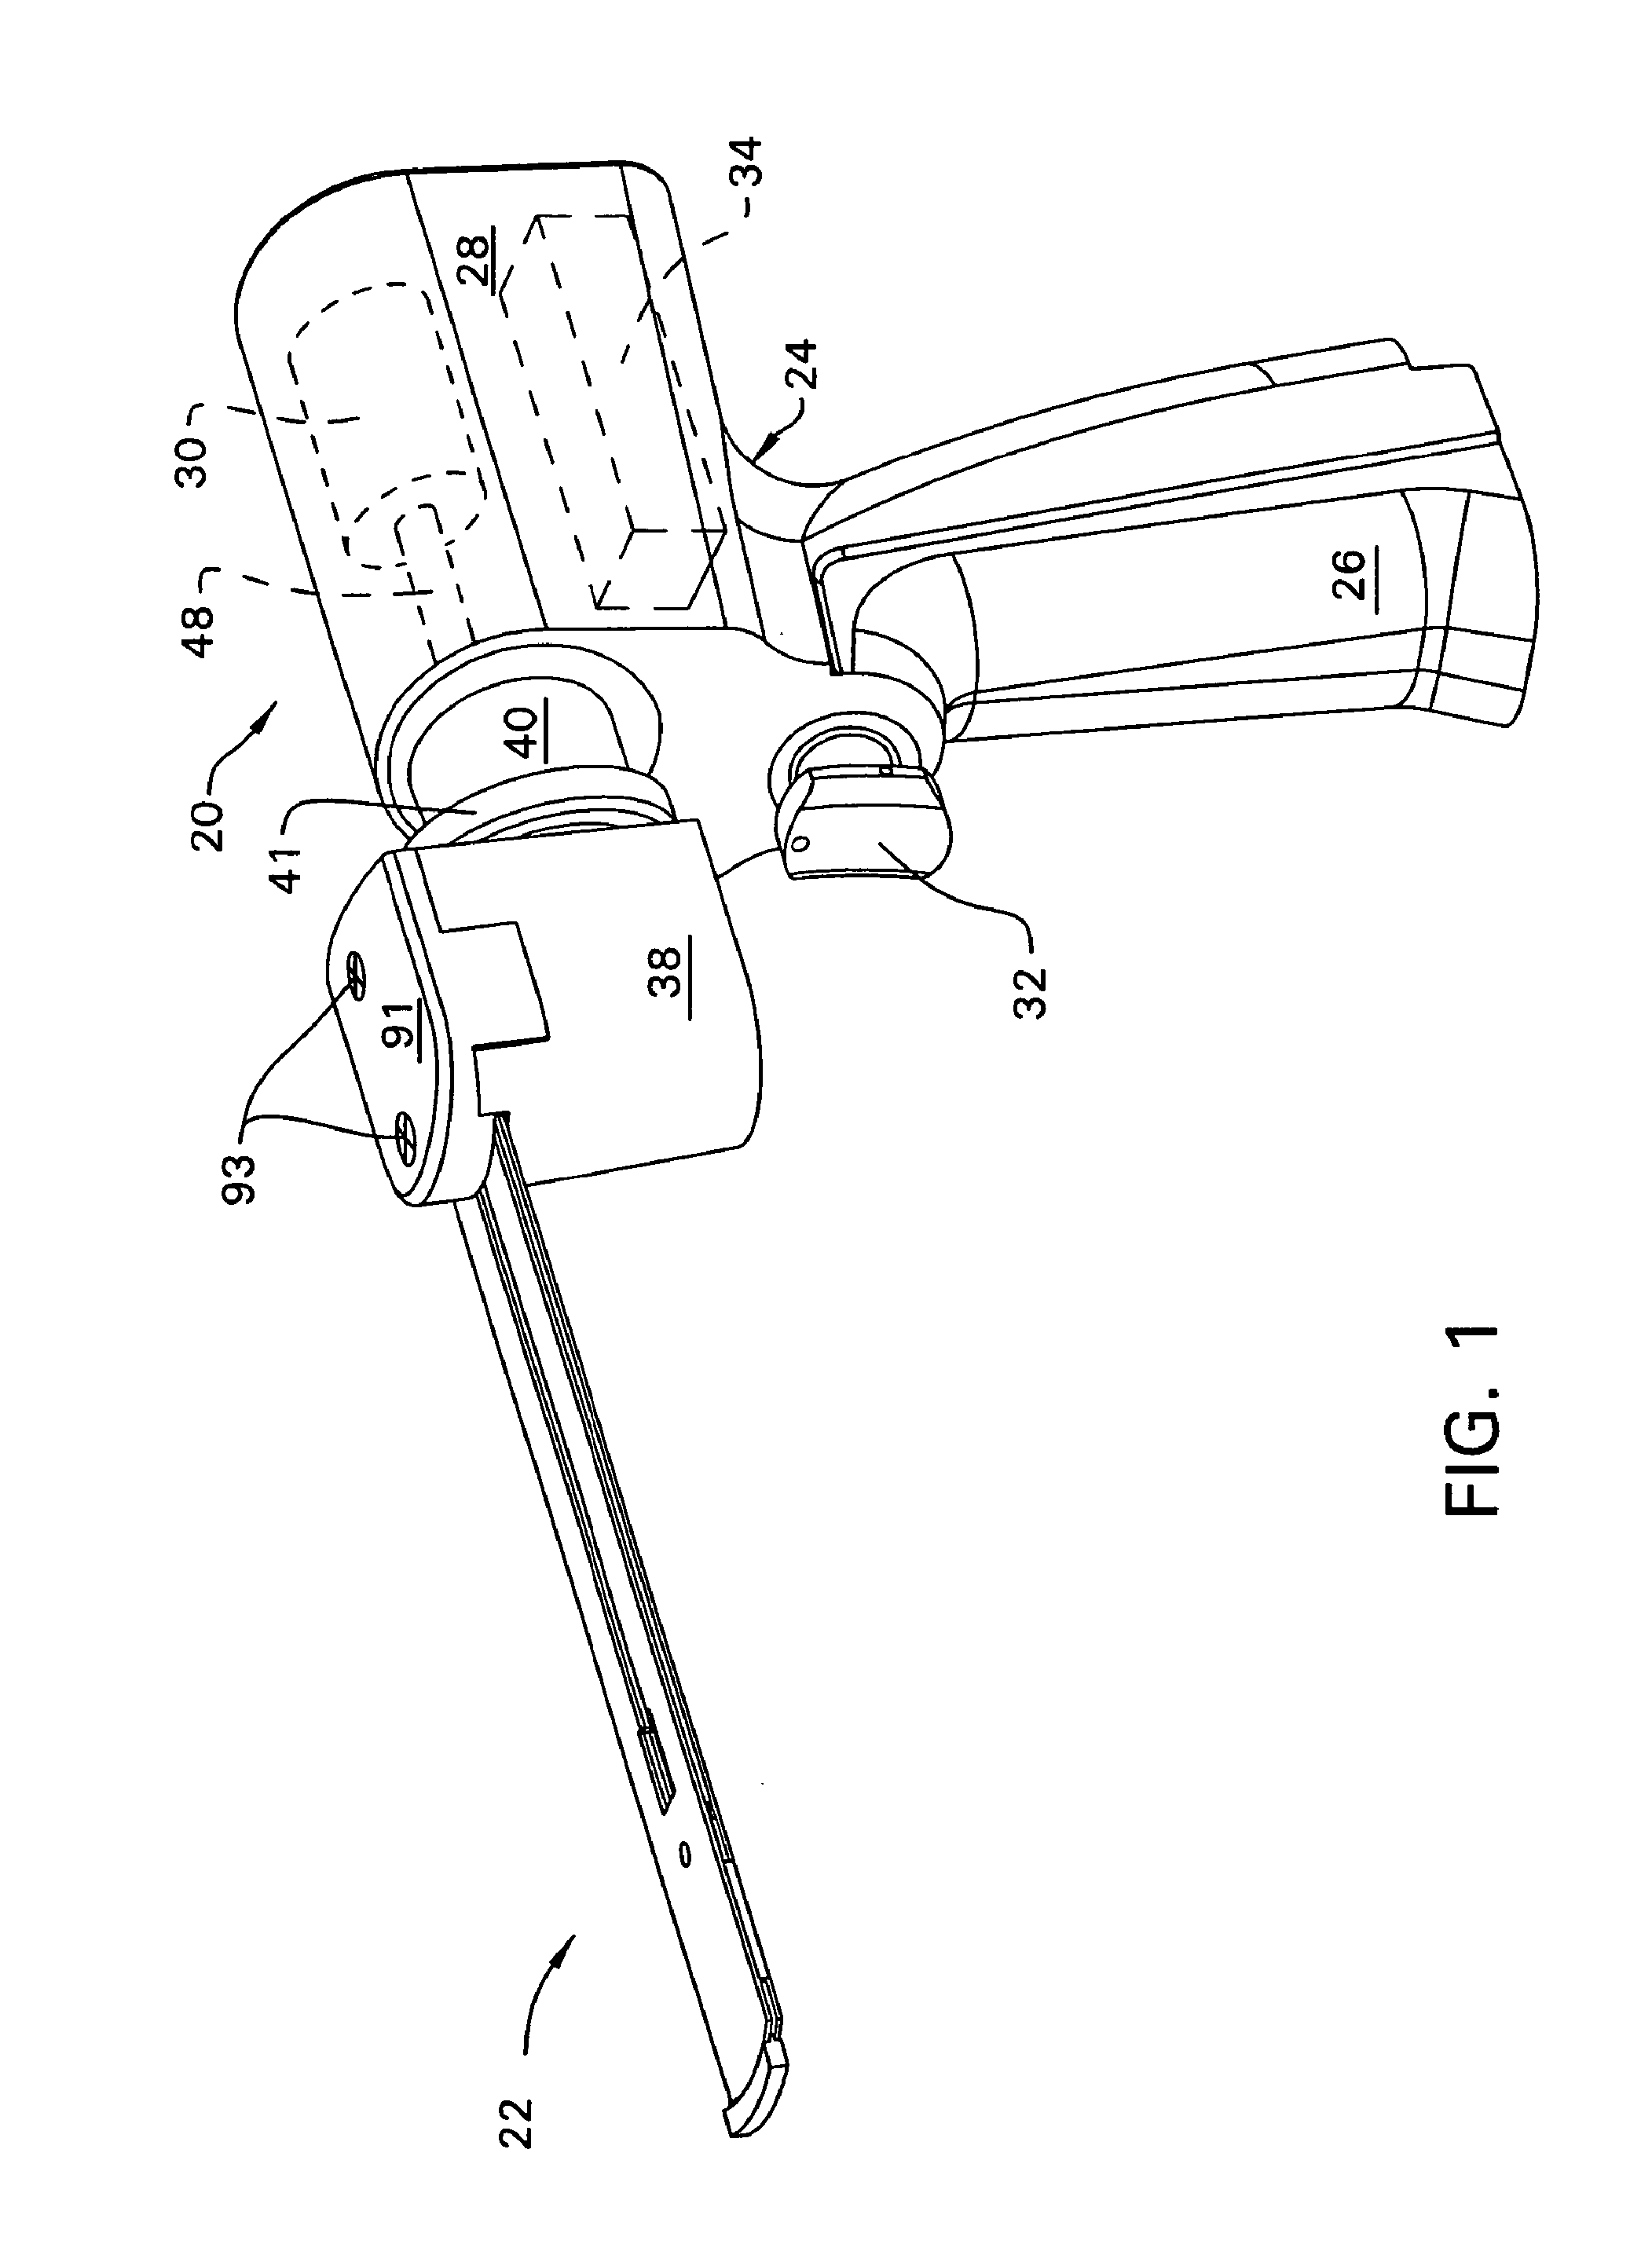 Surgical sagittal saw blade including a guide bar, a blade head and drive rods for pivoting the blade head